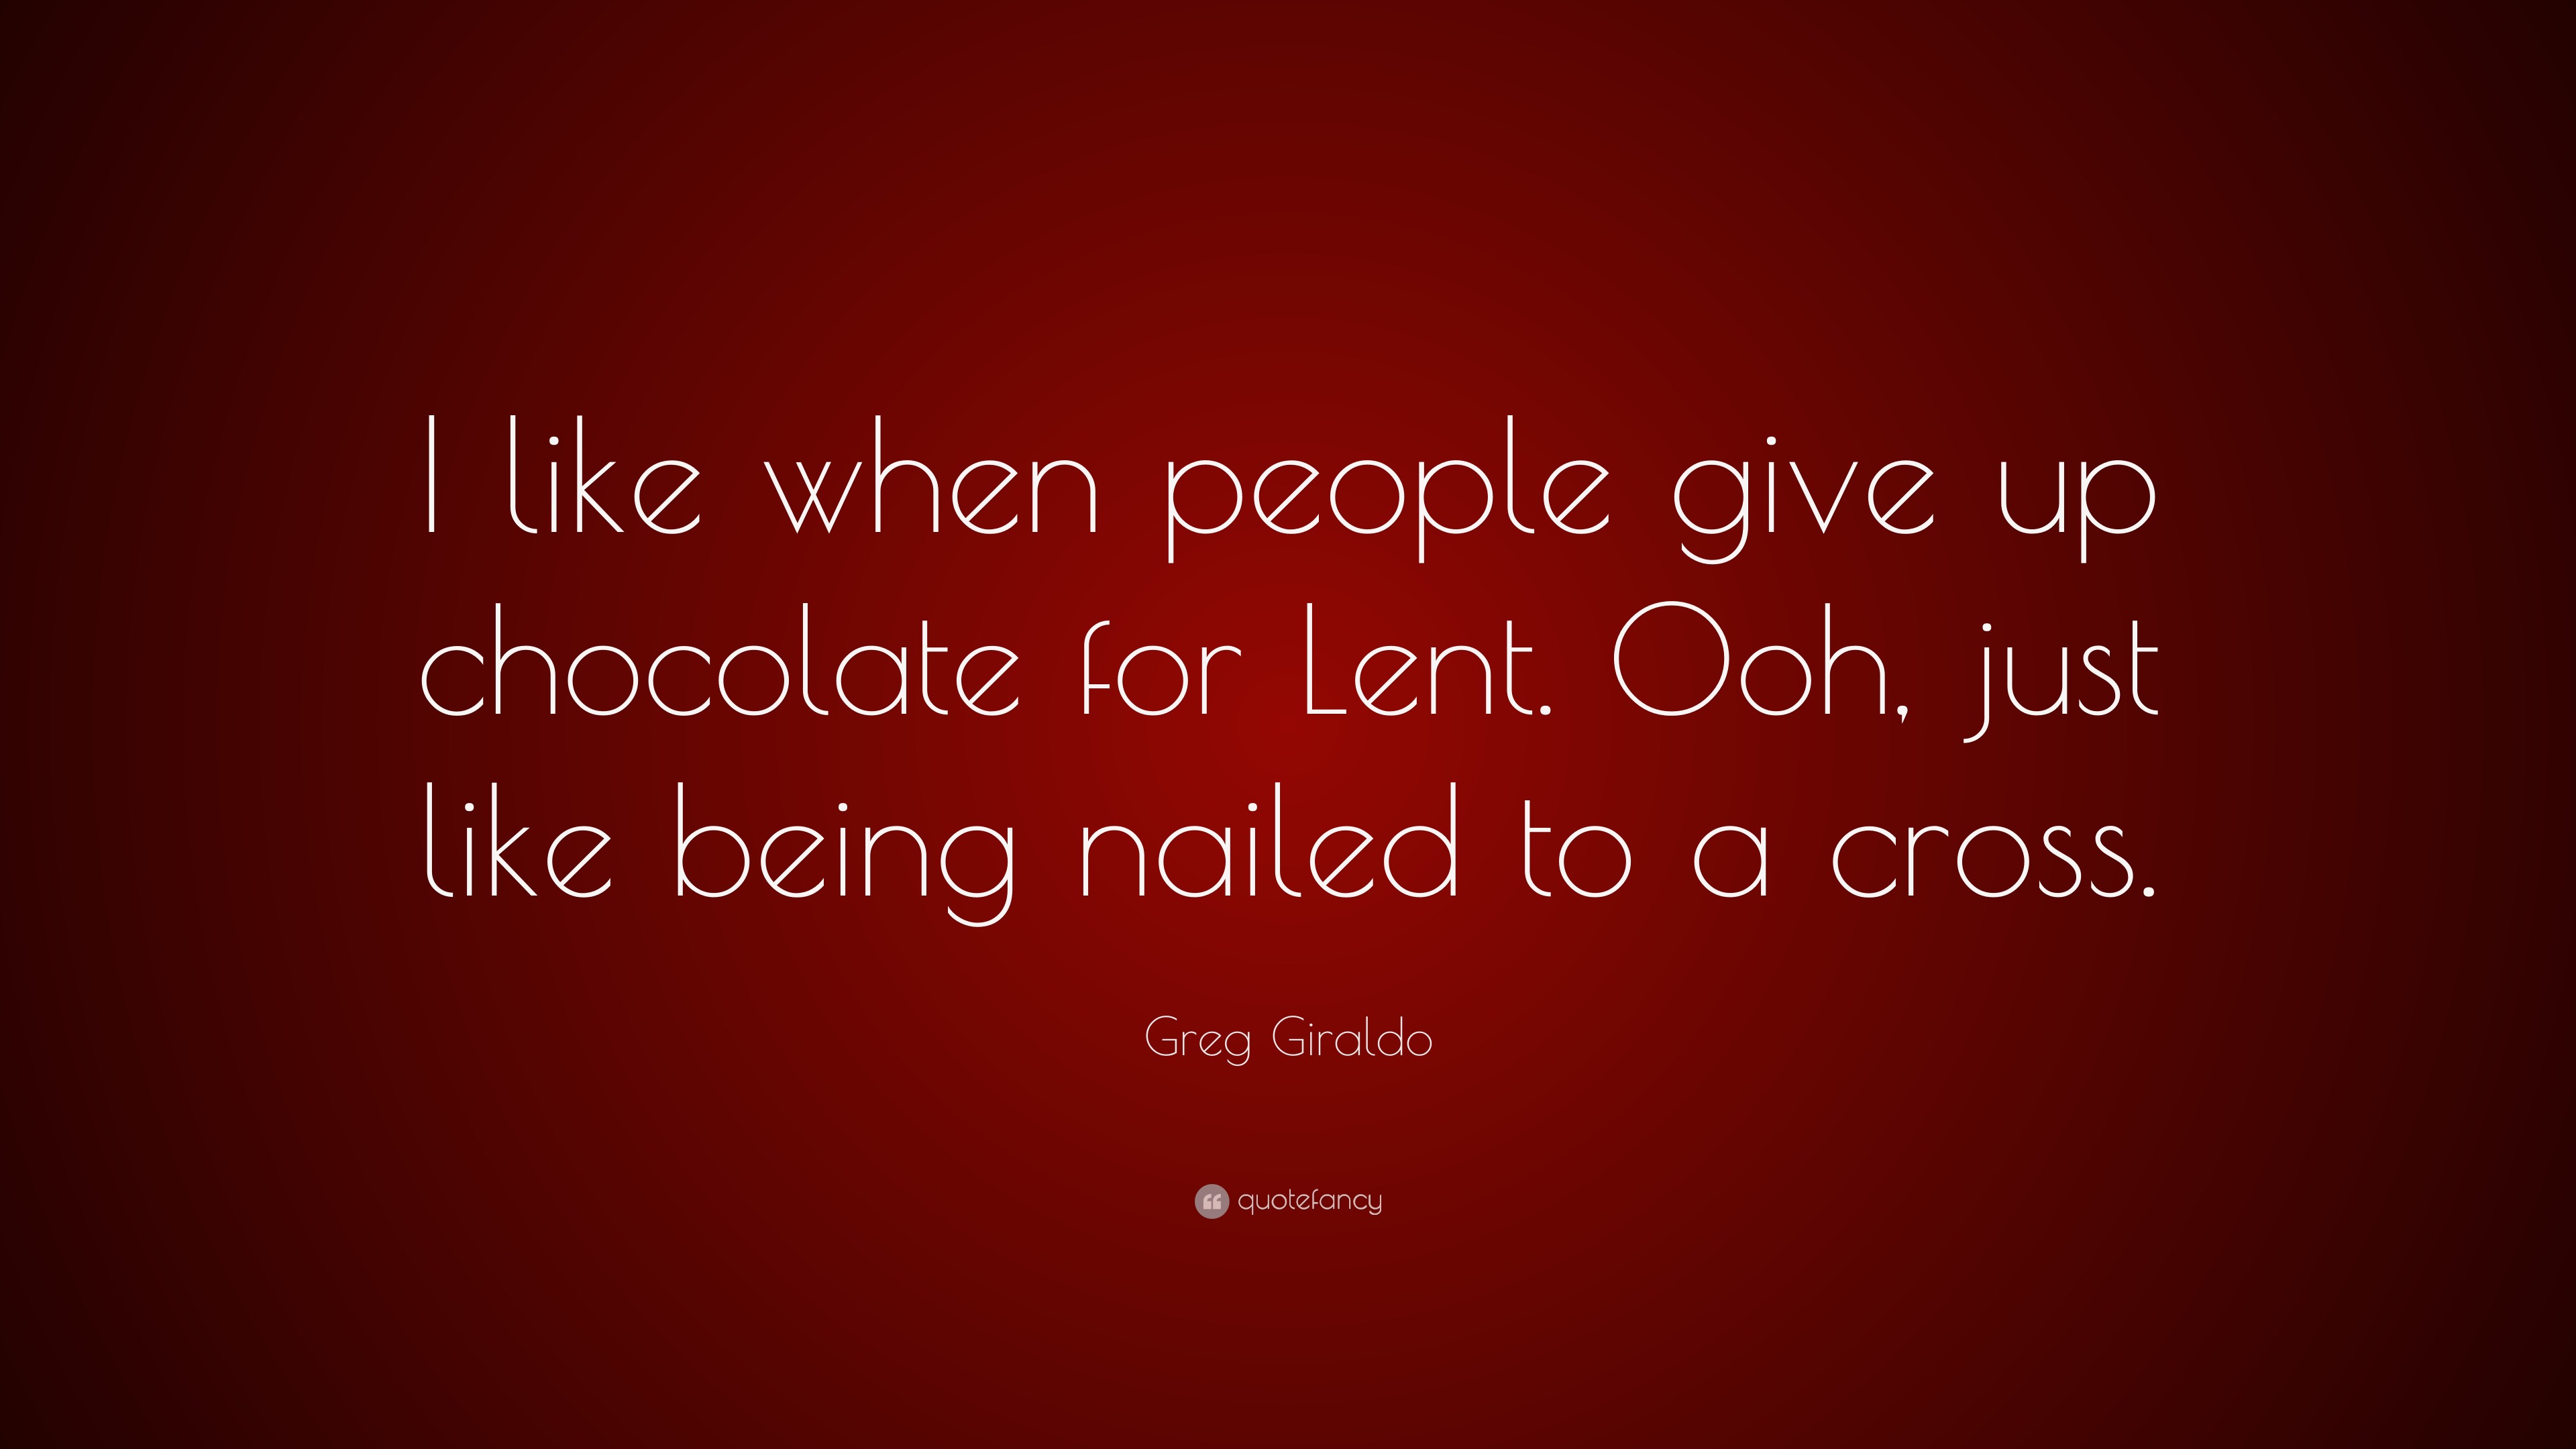 Greg Giraldo Quote “I like when people give up chocolate for Lent Ooh